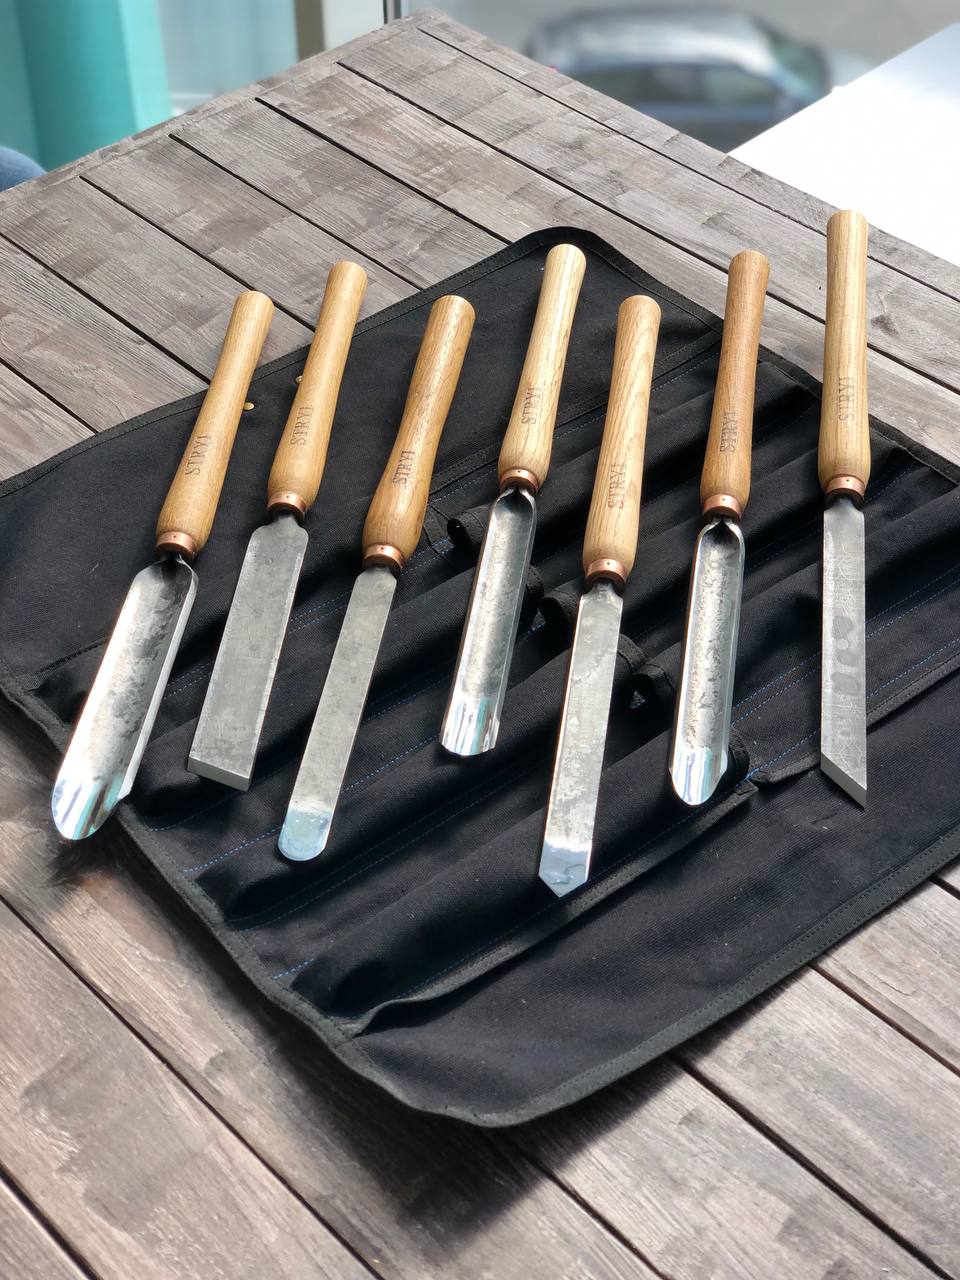 Wood turning toolset of 7 Wood Turning chisels STRYI Standart in roll-case, Woodturning kit, Gift for woodworker, Lathe Tools